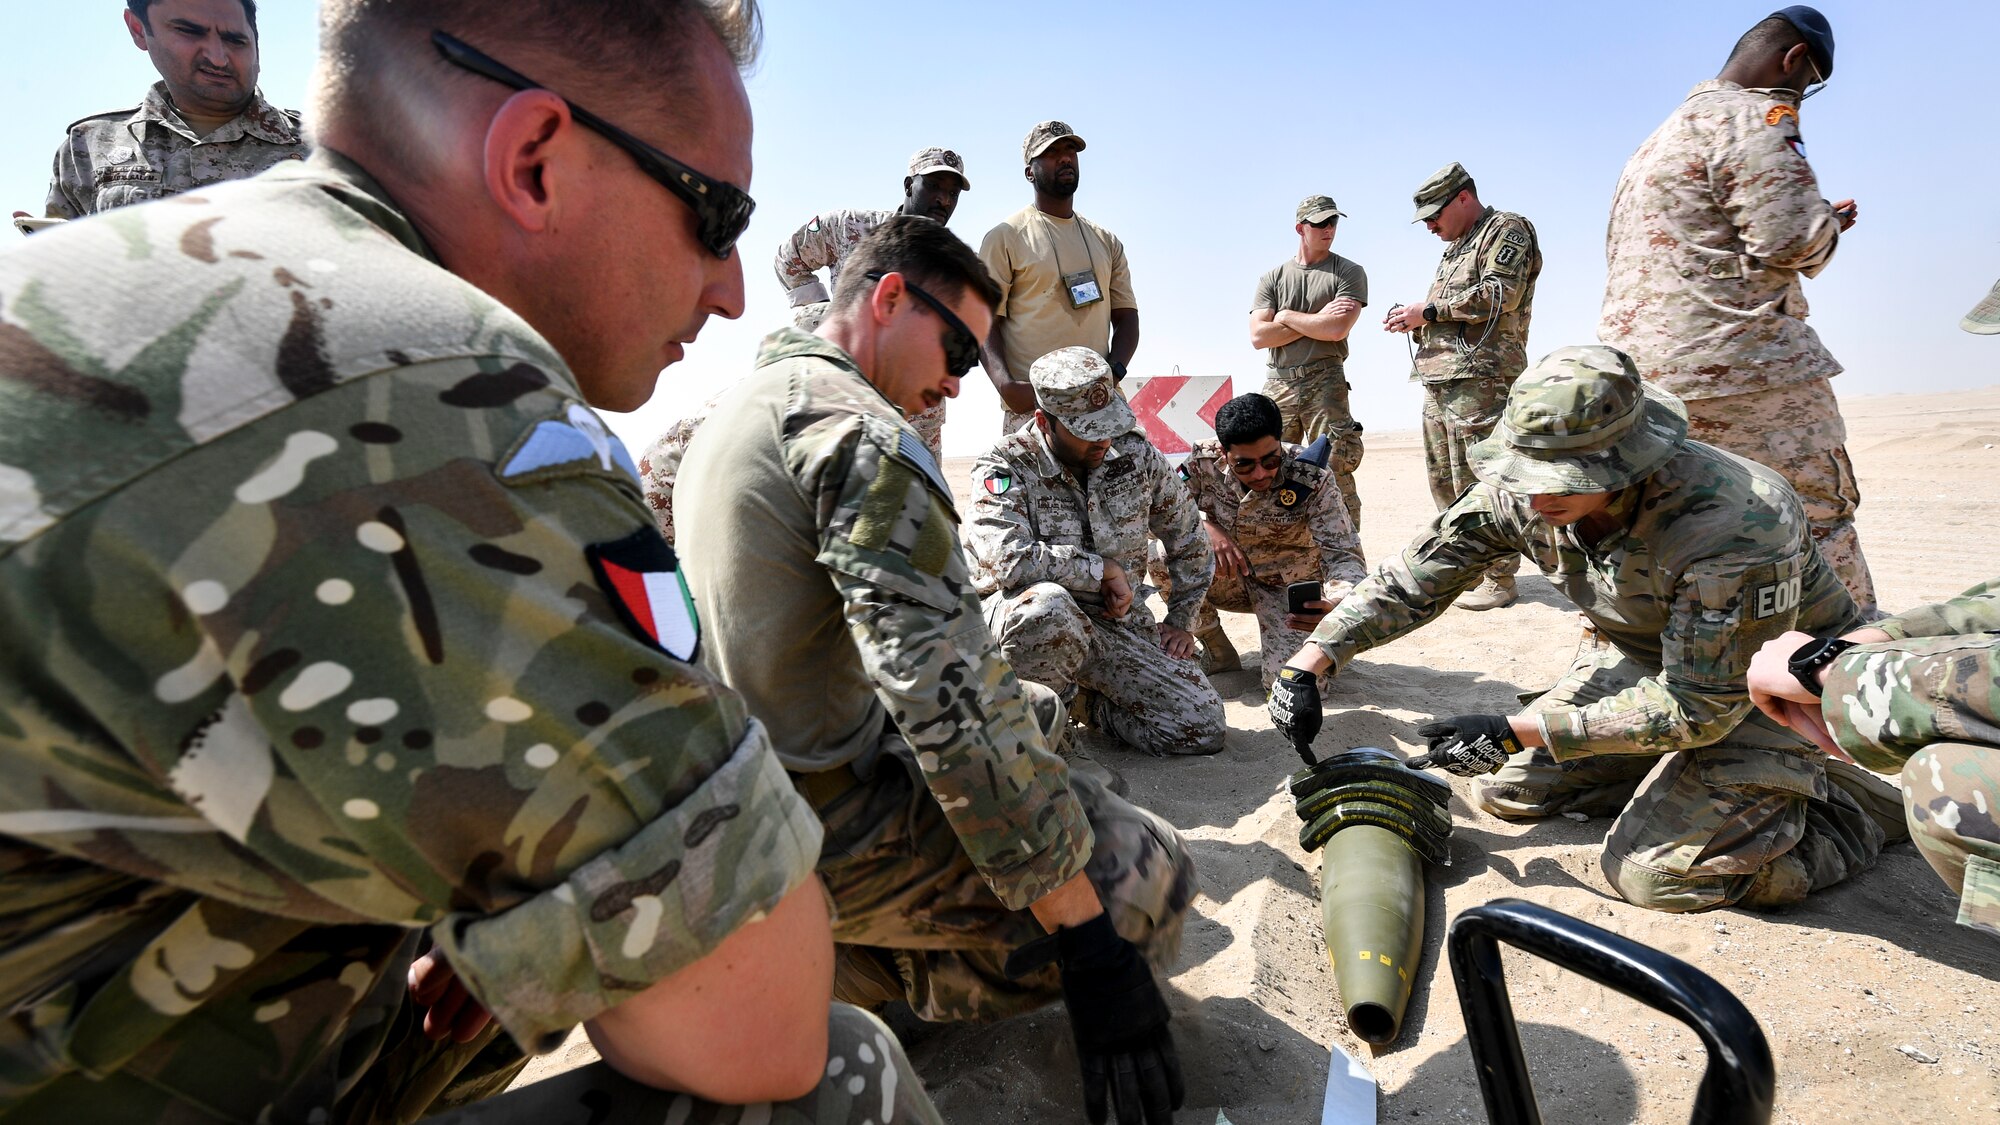 U.S. Army Sgt. 1st Class Jesse Harris, 744th Ordnance Company operations sergeant, demonstrates proper placement of C-4 high explosives on to a 155MM insensitive high explosive round before a munitions disposal training at the Udari Range, Kuwait, Sept. 30, 2019. C-4’s high cutting ability when detonated makes it the ideal explosive to use in disposal or controlled detonations of insensitive high explosive rounds.